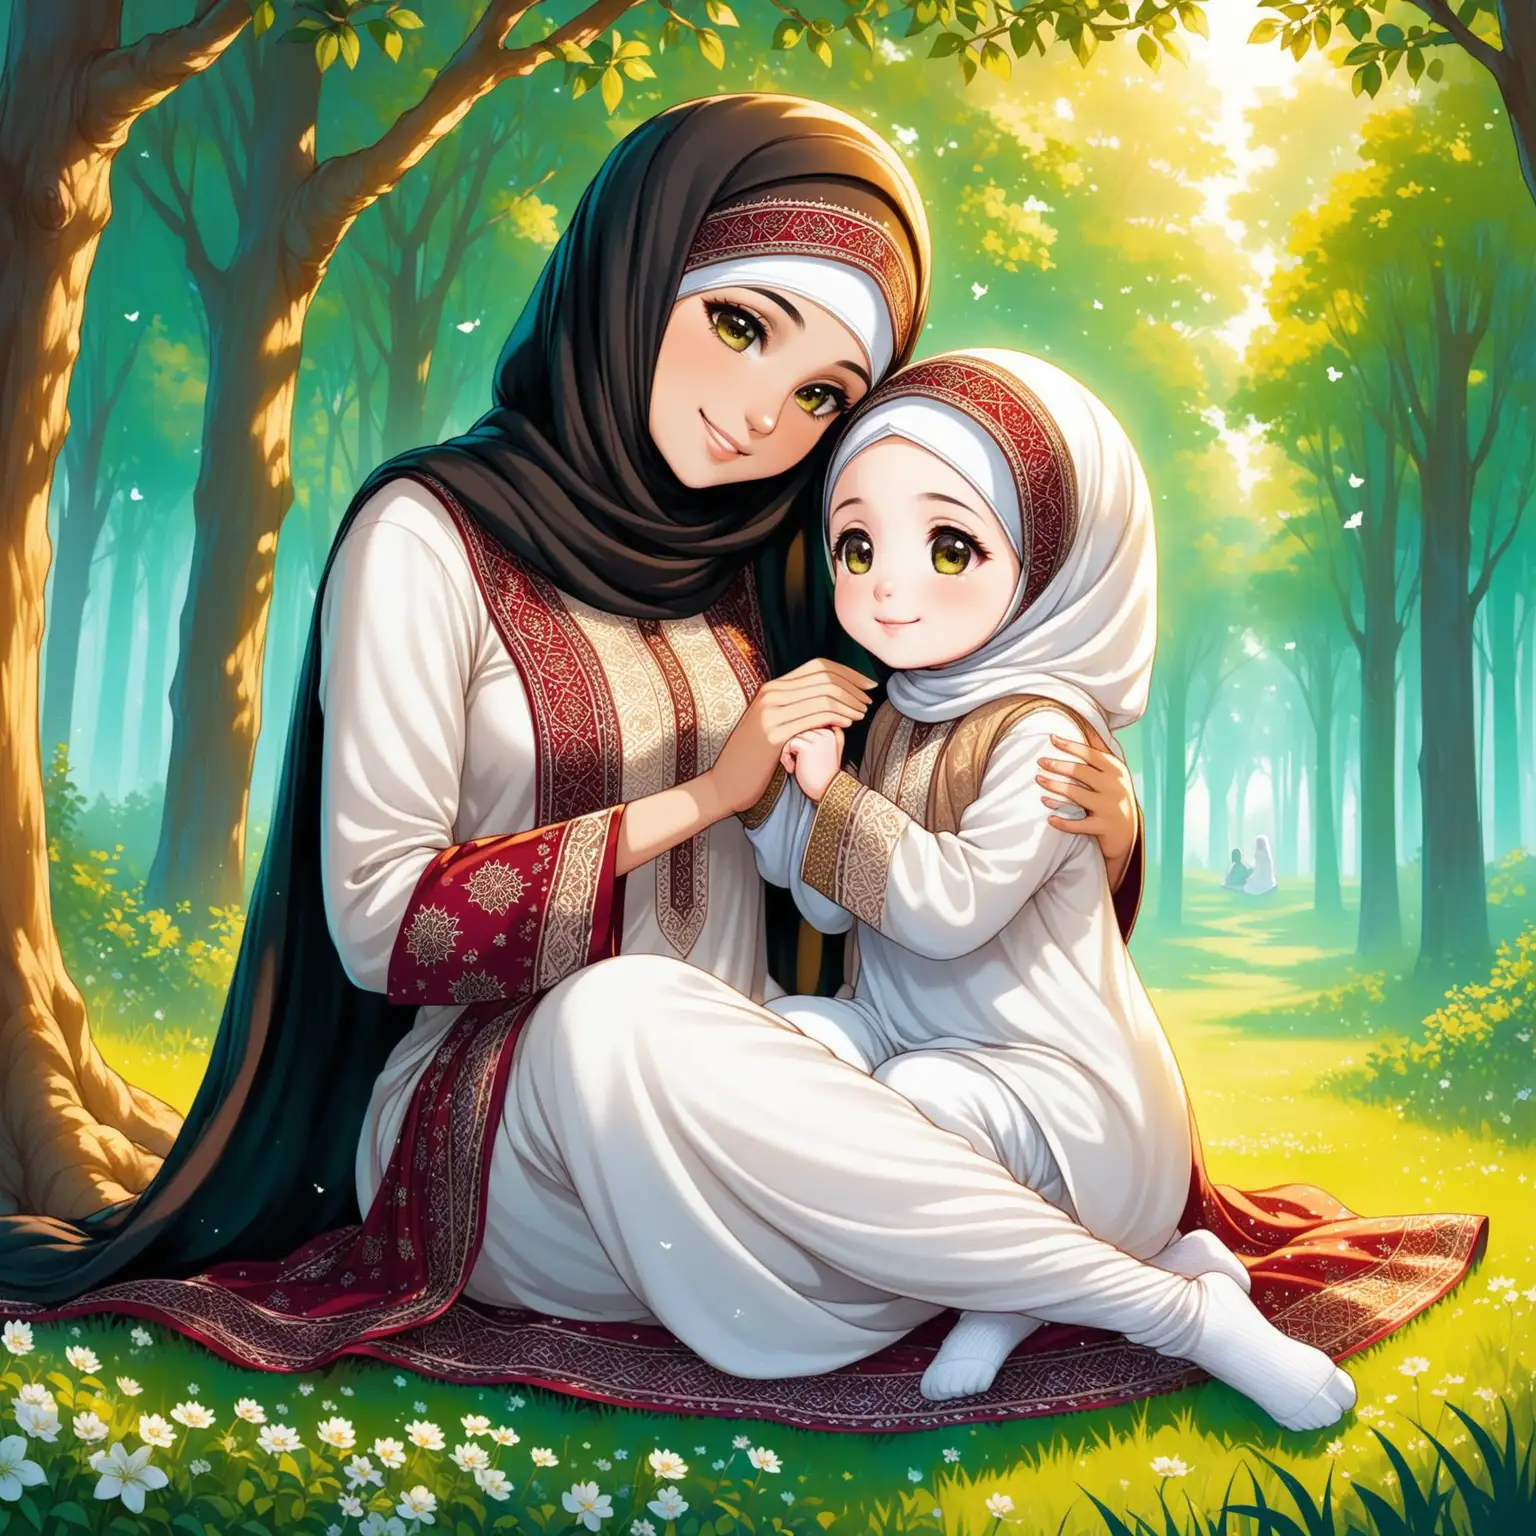 Character Persian girl(full height, Muslim, with emphasis no hair out of veil(Hijab), smaller eyes, bigger nose, white skin, cute, smiling, wearing socks, clothes full of Persian designs) named Fatemeh. Fatemeh is sitting kissing the hand of her mother politely, loose clothing.

Atmosphere forest, grass flowers, etc...